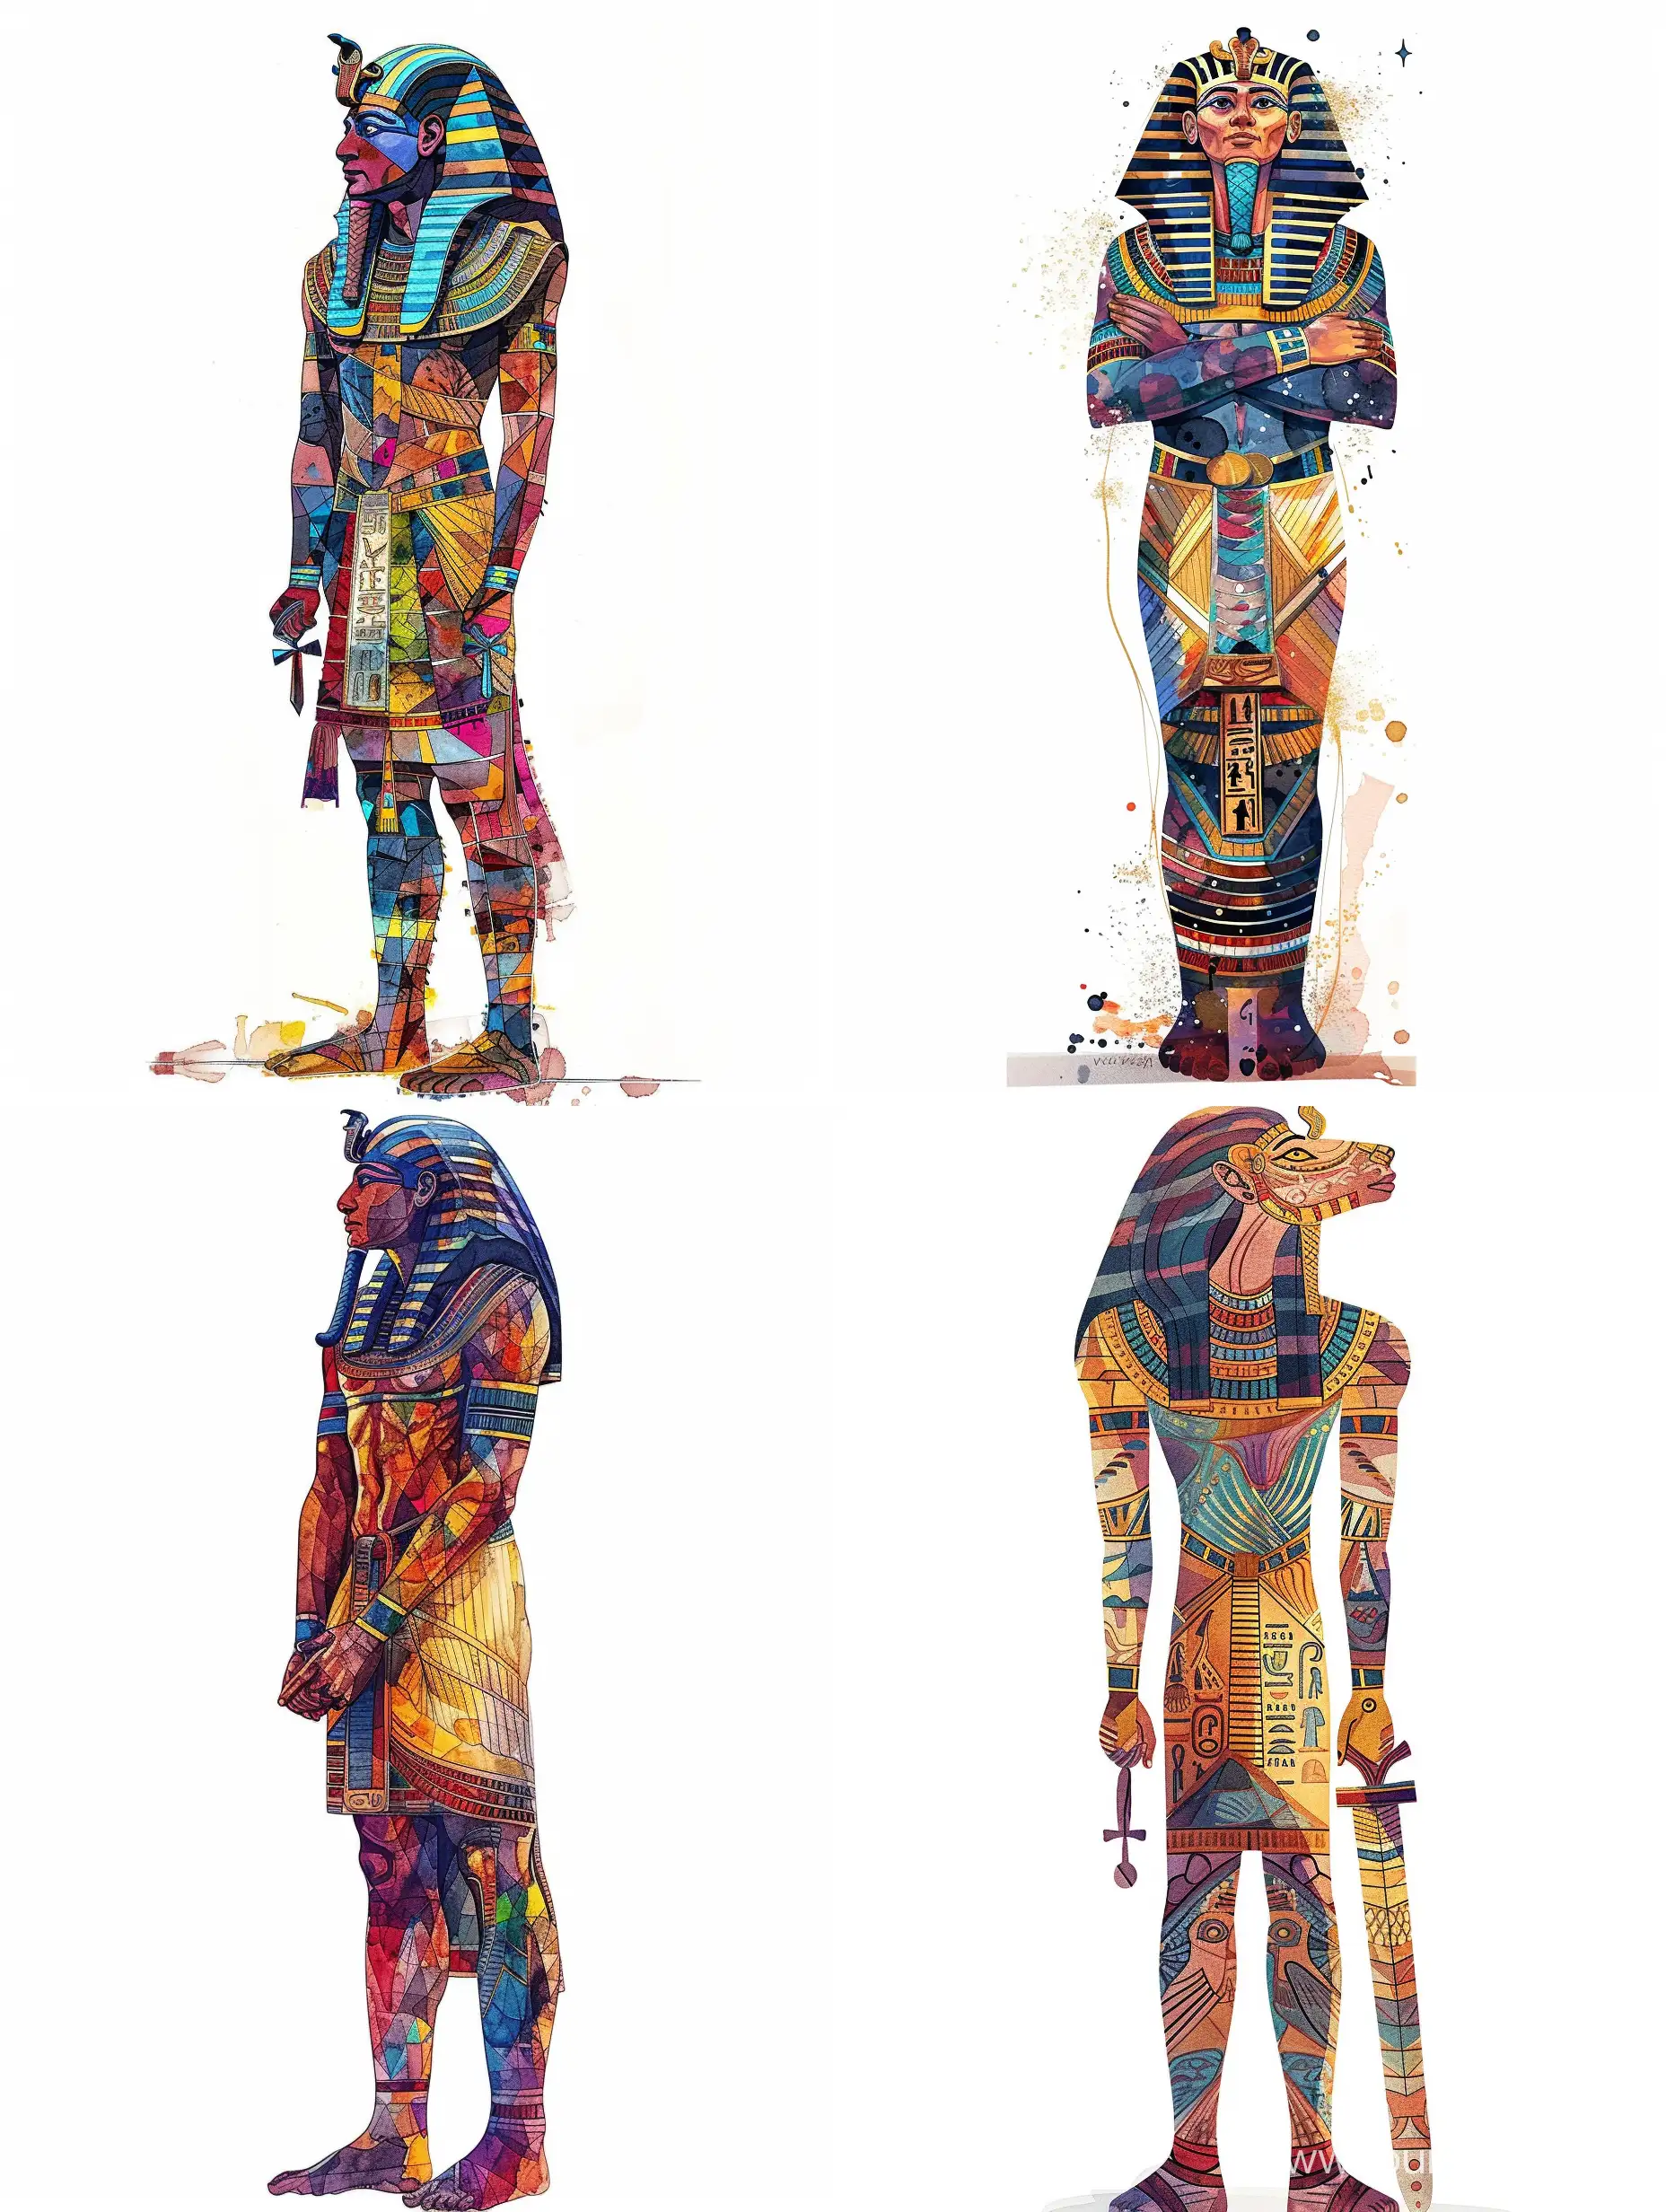 ancient Egyptian warrior, standing tall, in the hands of me, stylized caricature, detailed, decorative, bright colors, Victor Ngai, watercolor, ink, on a white background, flat drawing